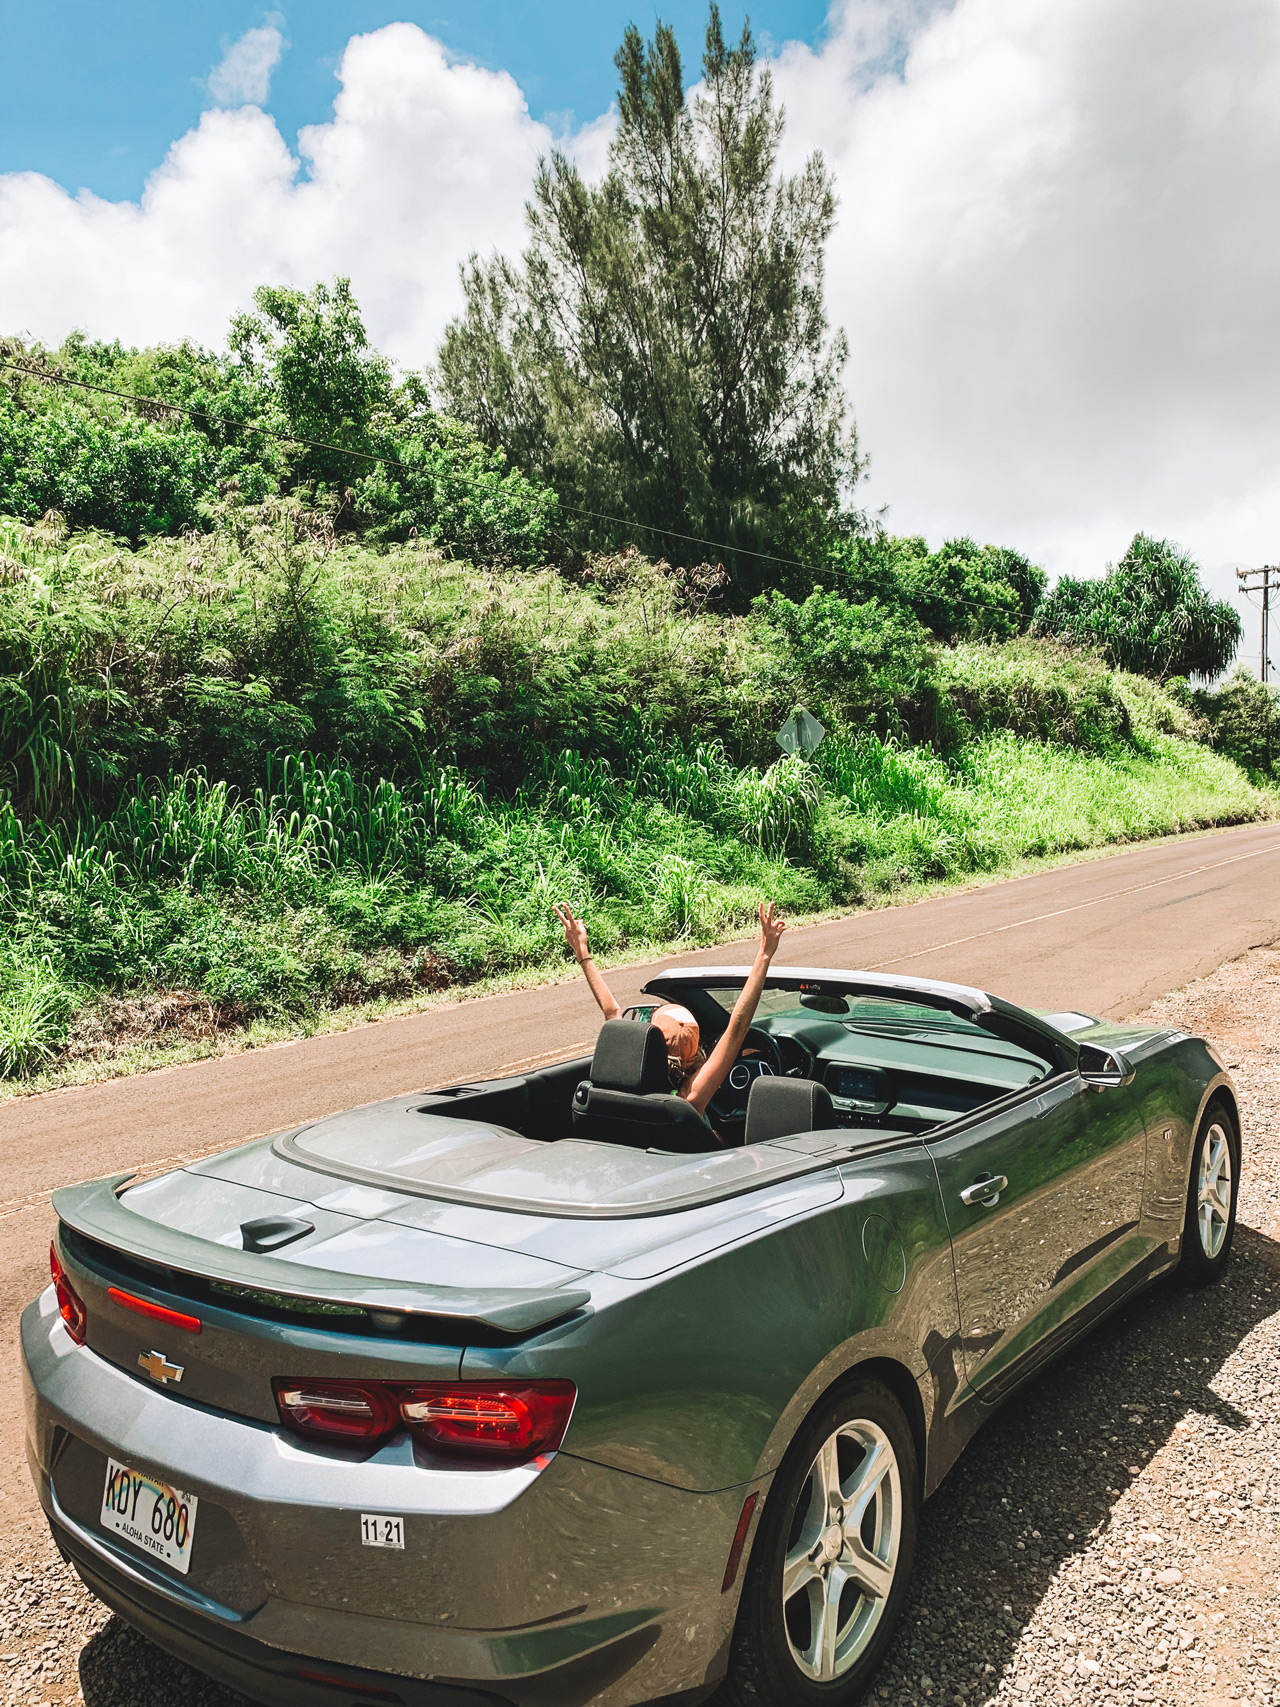 Convertible car on dirt road with lone driver